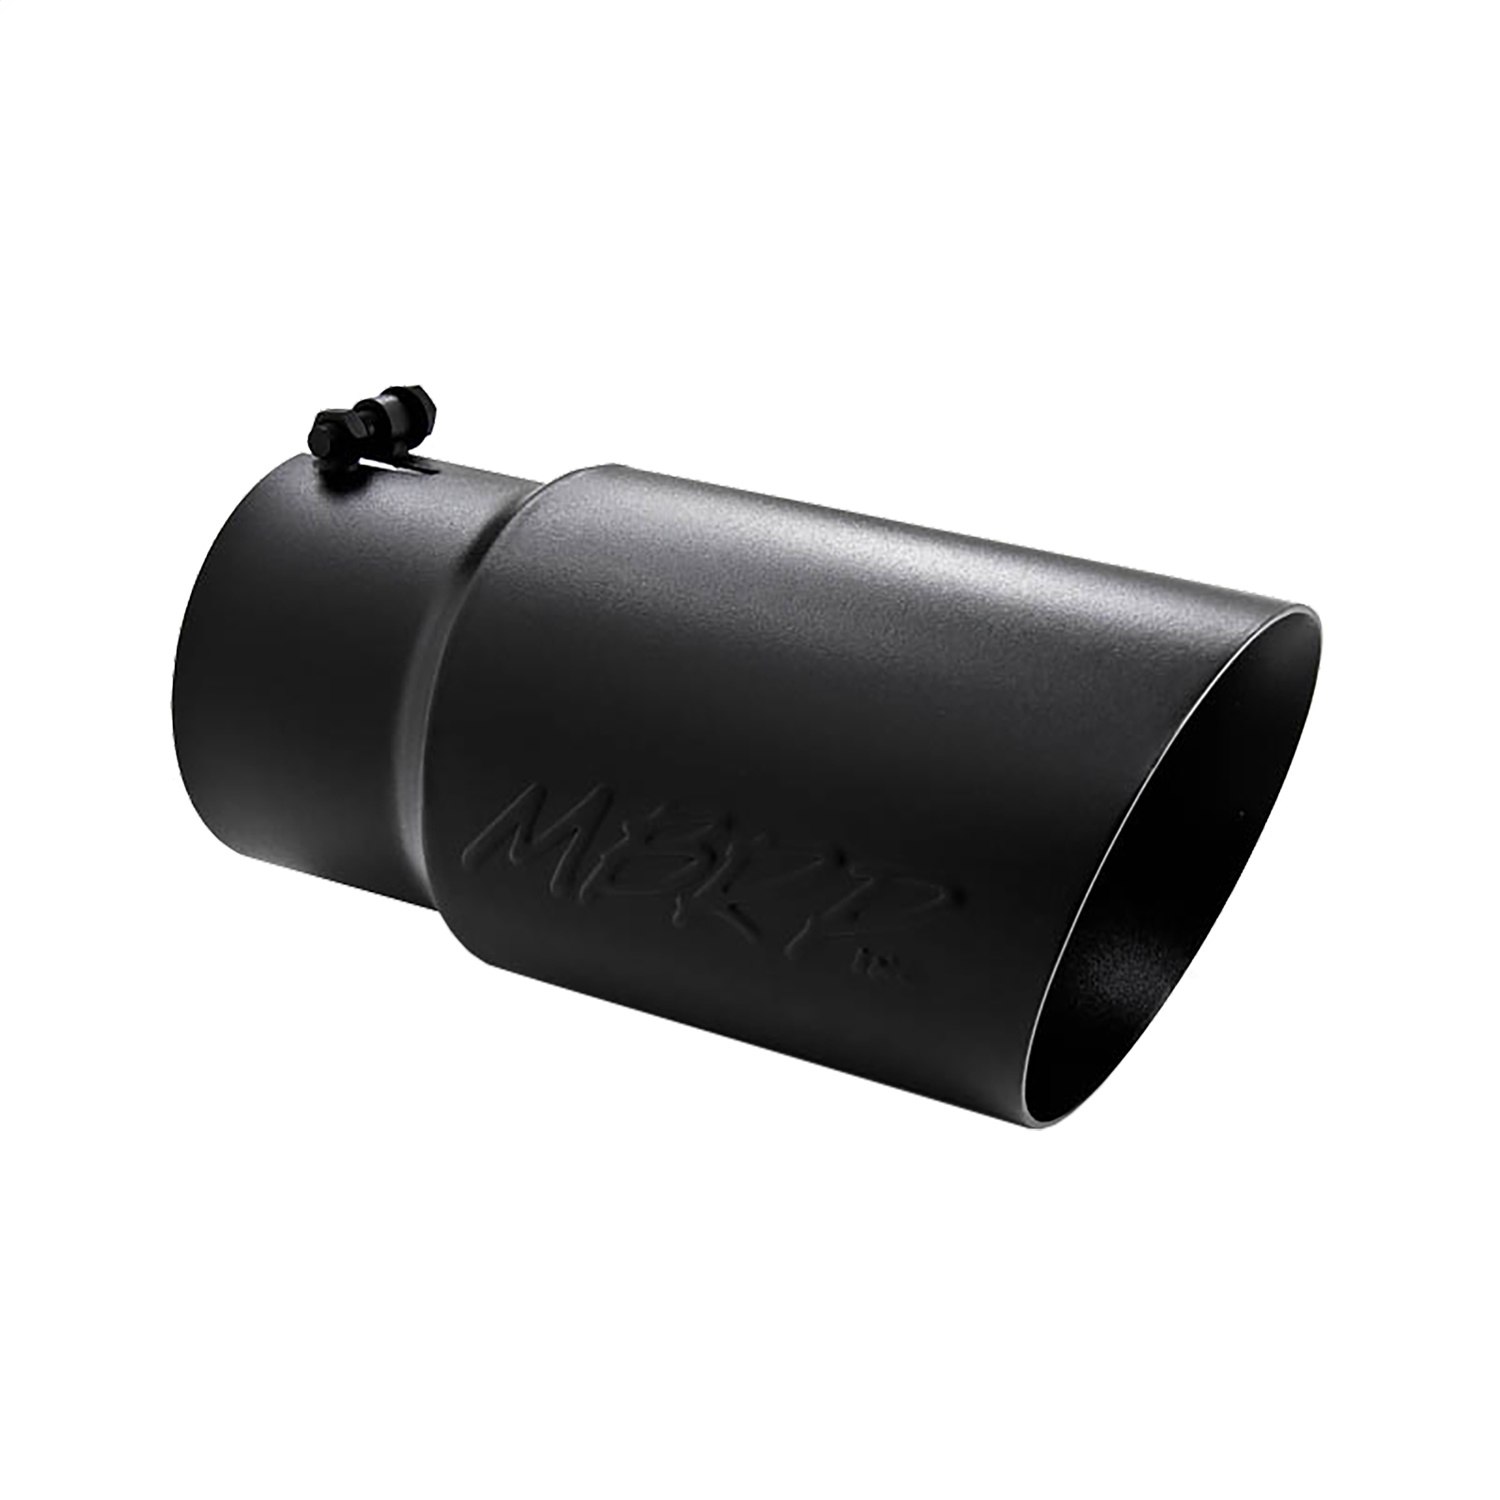 MBRP Exhaust MBRP Exhaust T5074BLK Dual Wall Angled Exhaust Tip